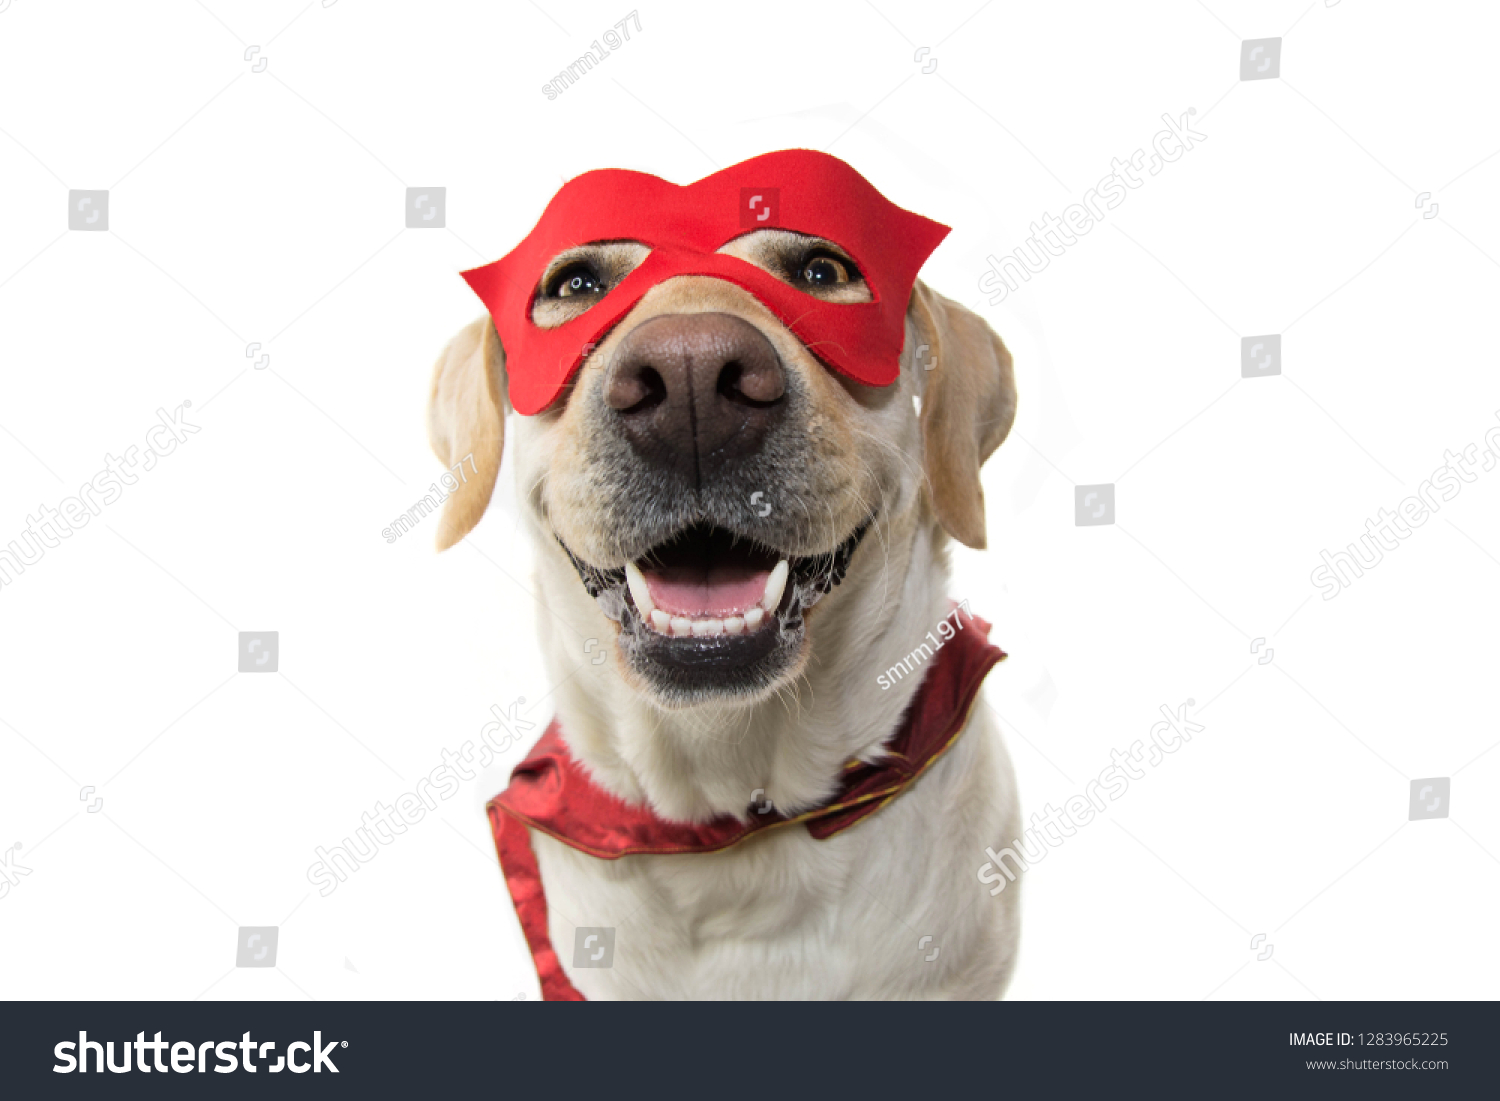 DOG SUPER HERO COSTUME. LABRADOR CLOSE-UP WEARING A RED MASK AND A CAPE.  CARNIVAL OR HALLOWEEN. ISOLATED STUDIO SHOT AGAINST WHITE BACKGROUND. #1283965225